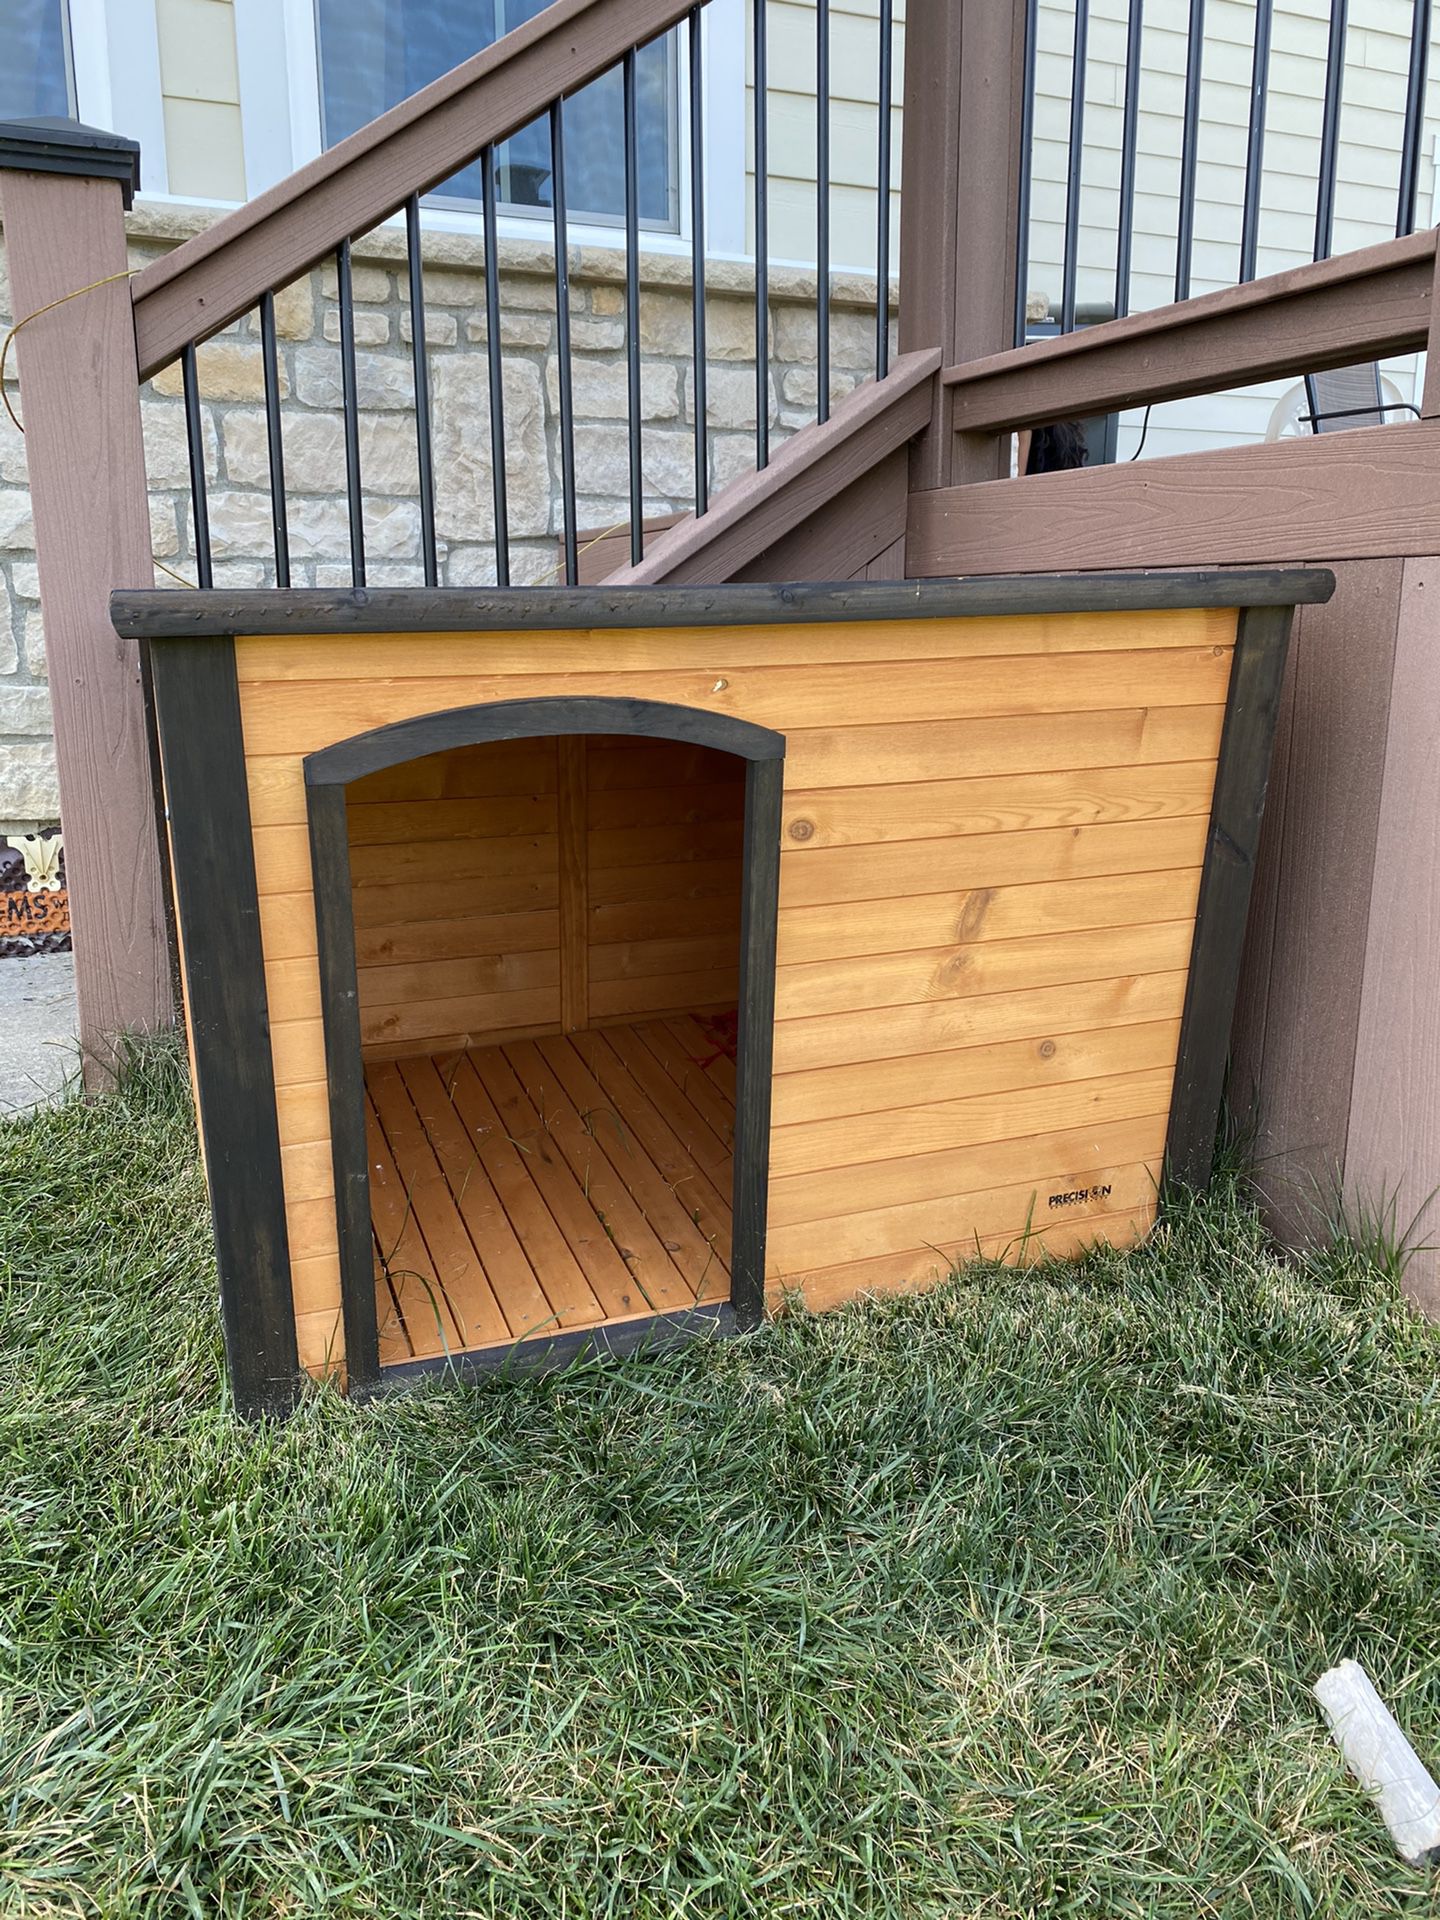 Dog house for $60